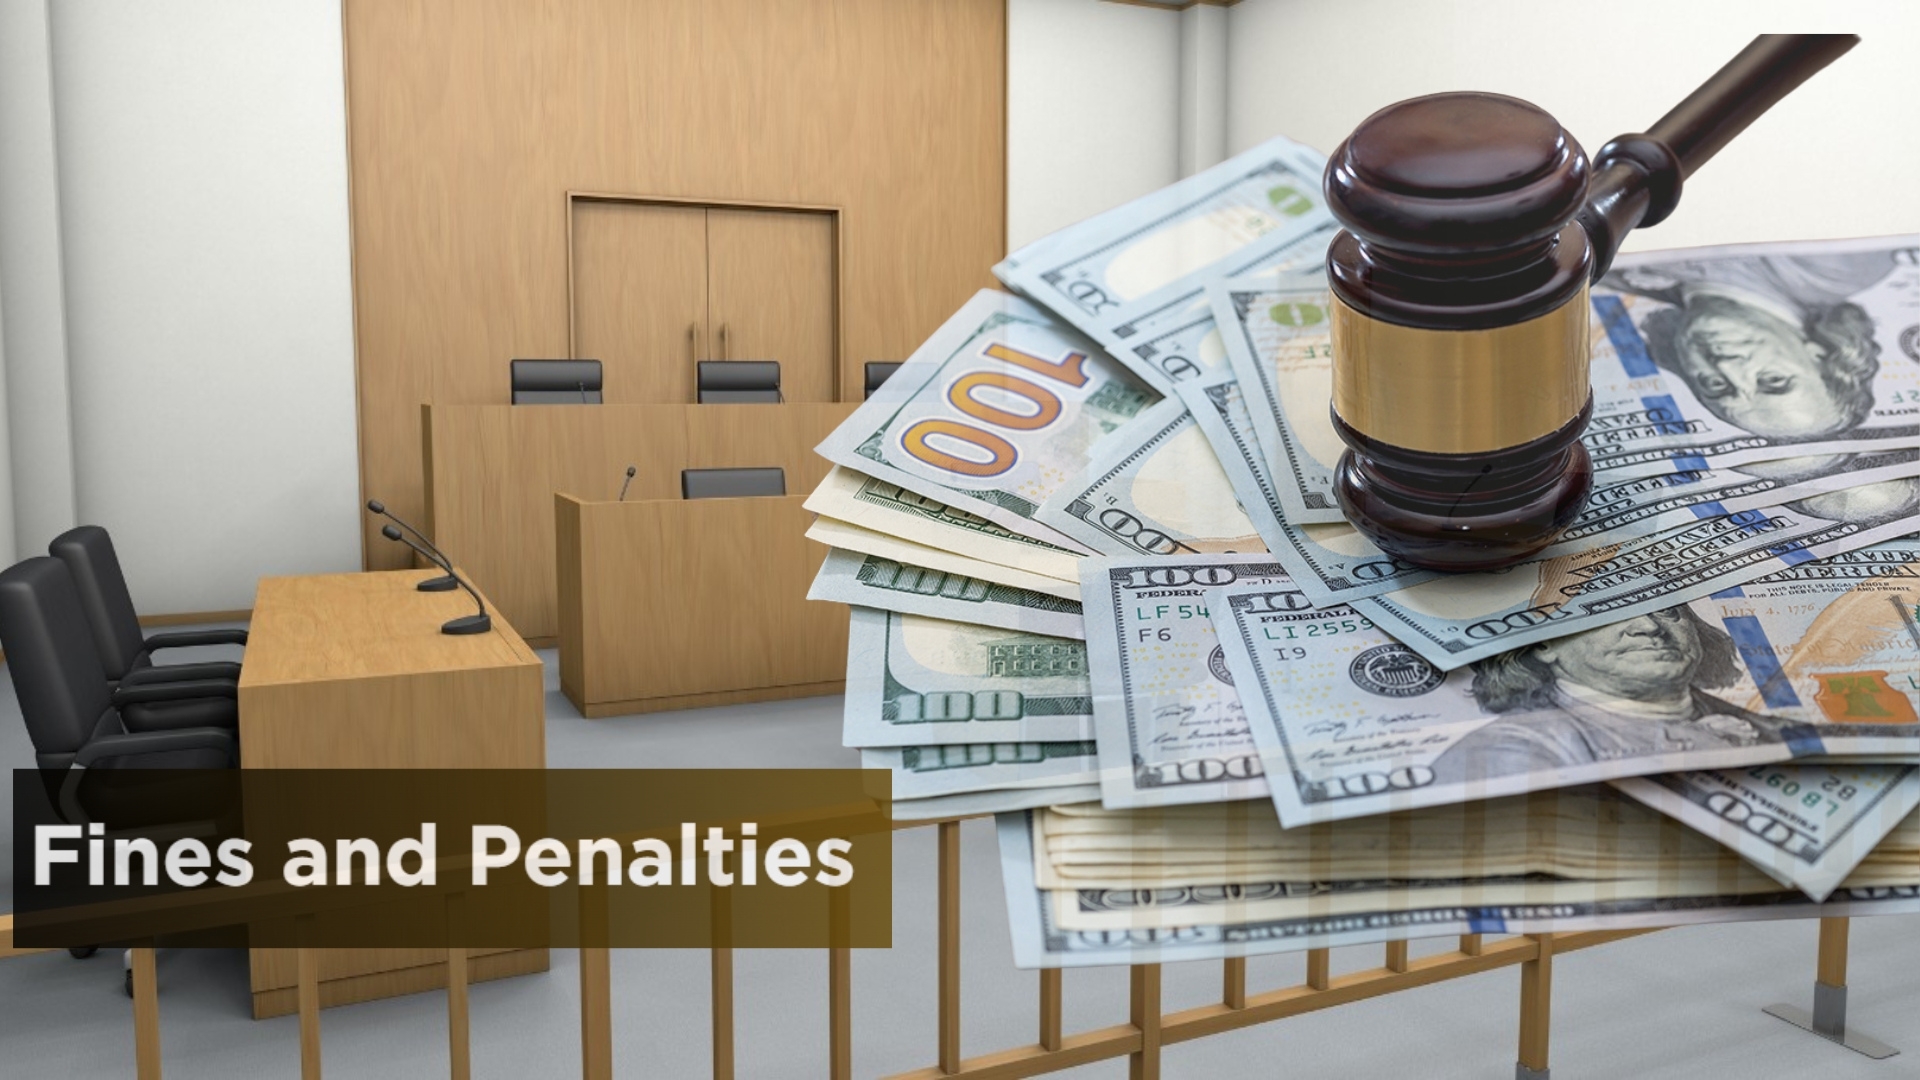 Facing fines from federal, state, or local authorities when law is not followed